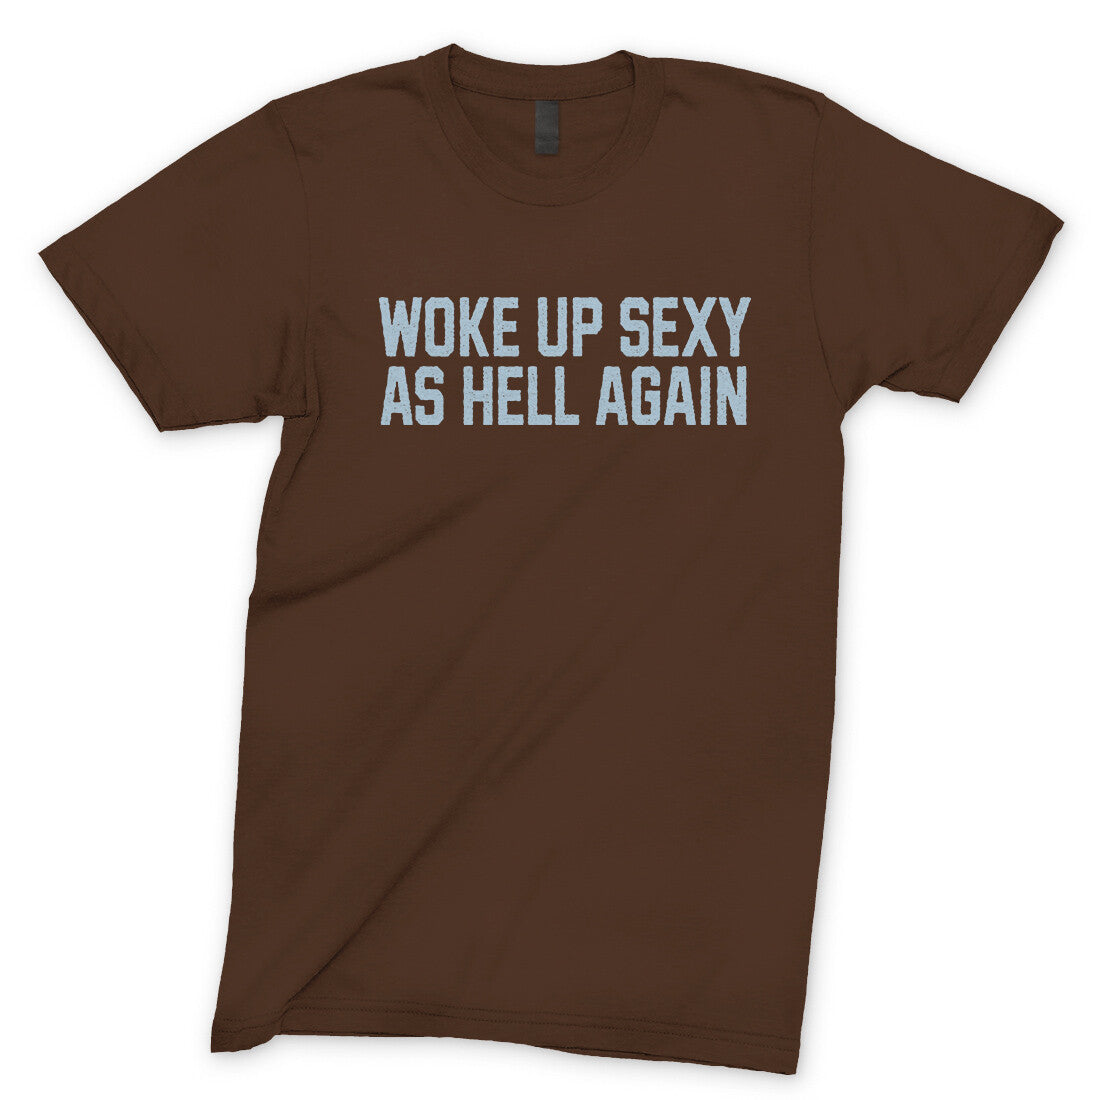 Woke Up Sexy as Hell in Dark Chocolate Color